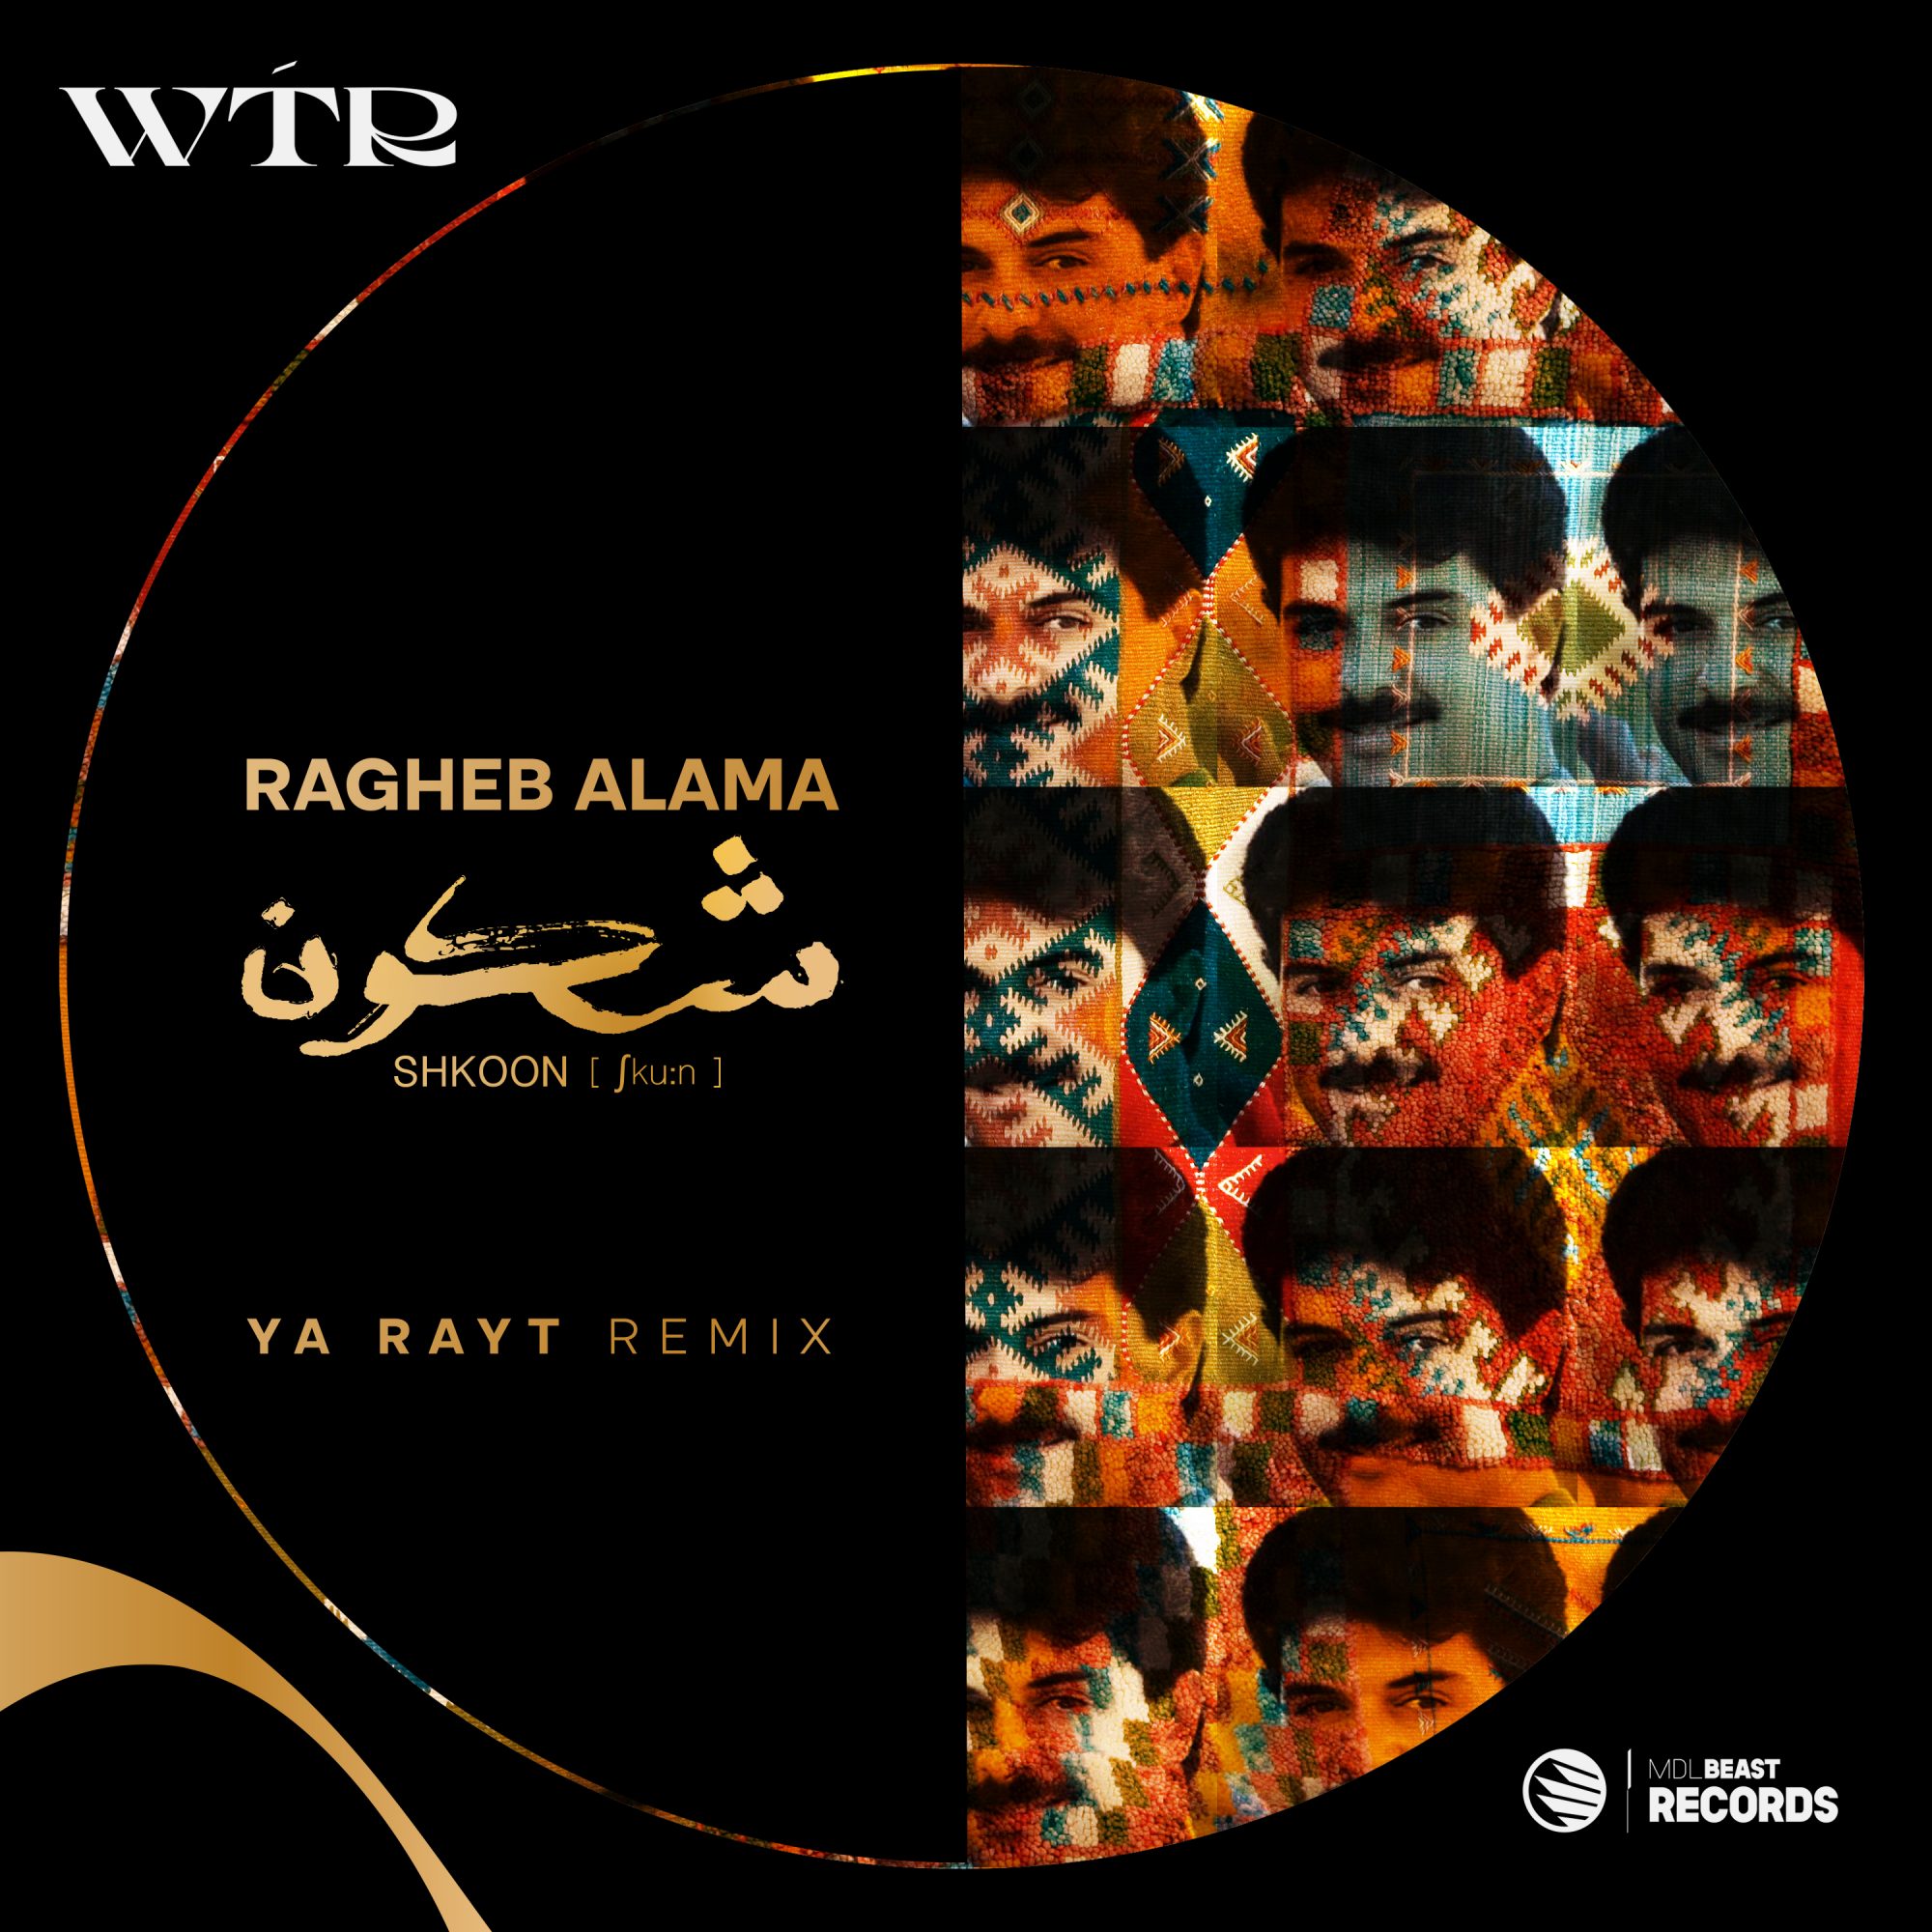 Ragheb Alama shares his enthusiasm for Ya Rayt remix by German-Syrian Live Act Shkoon